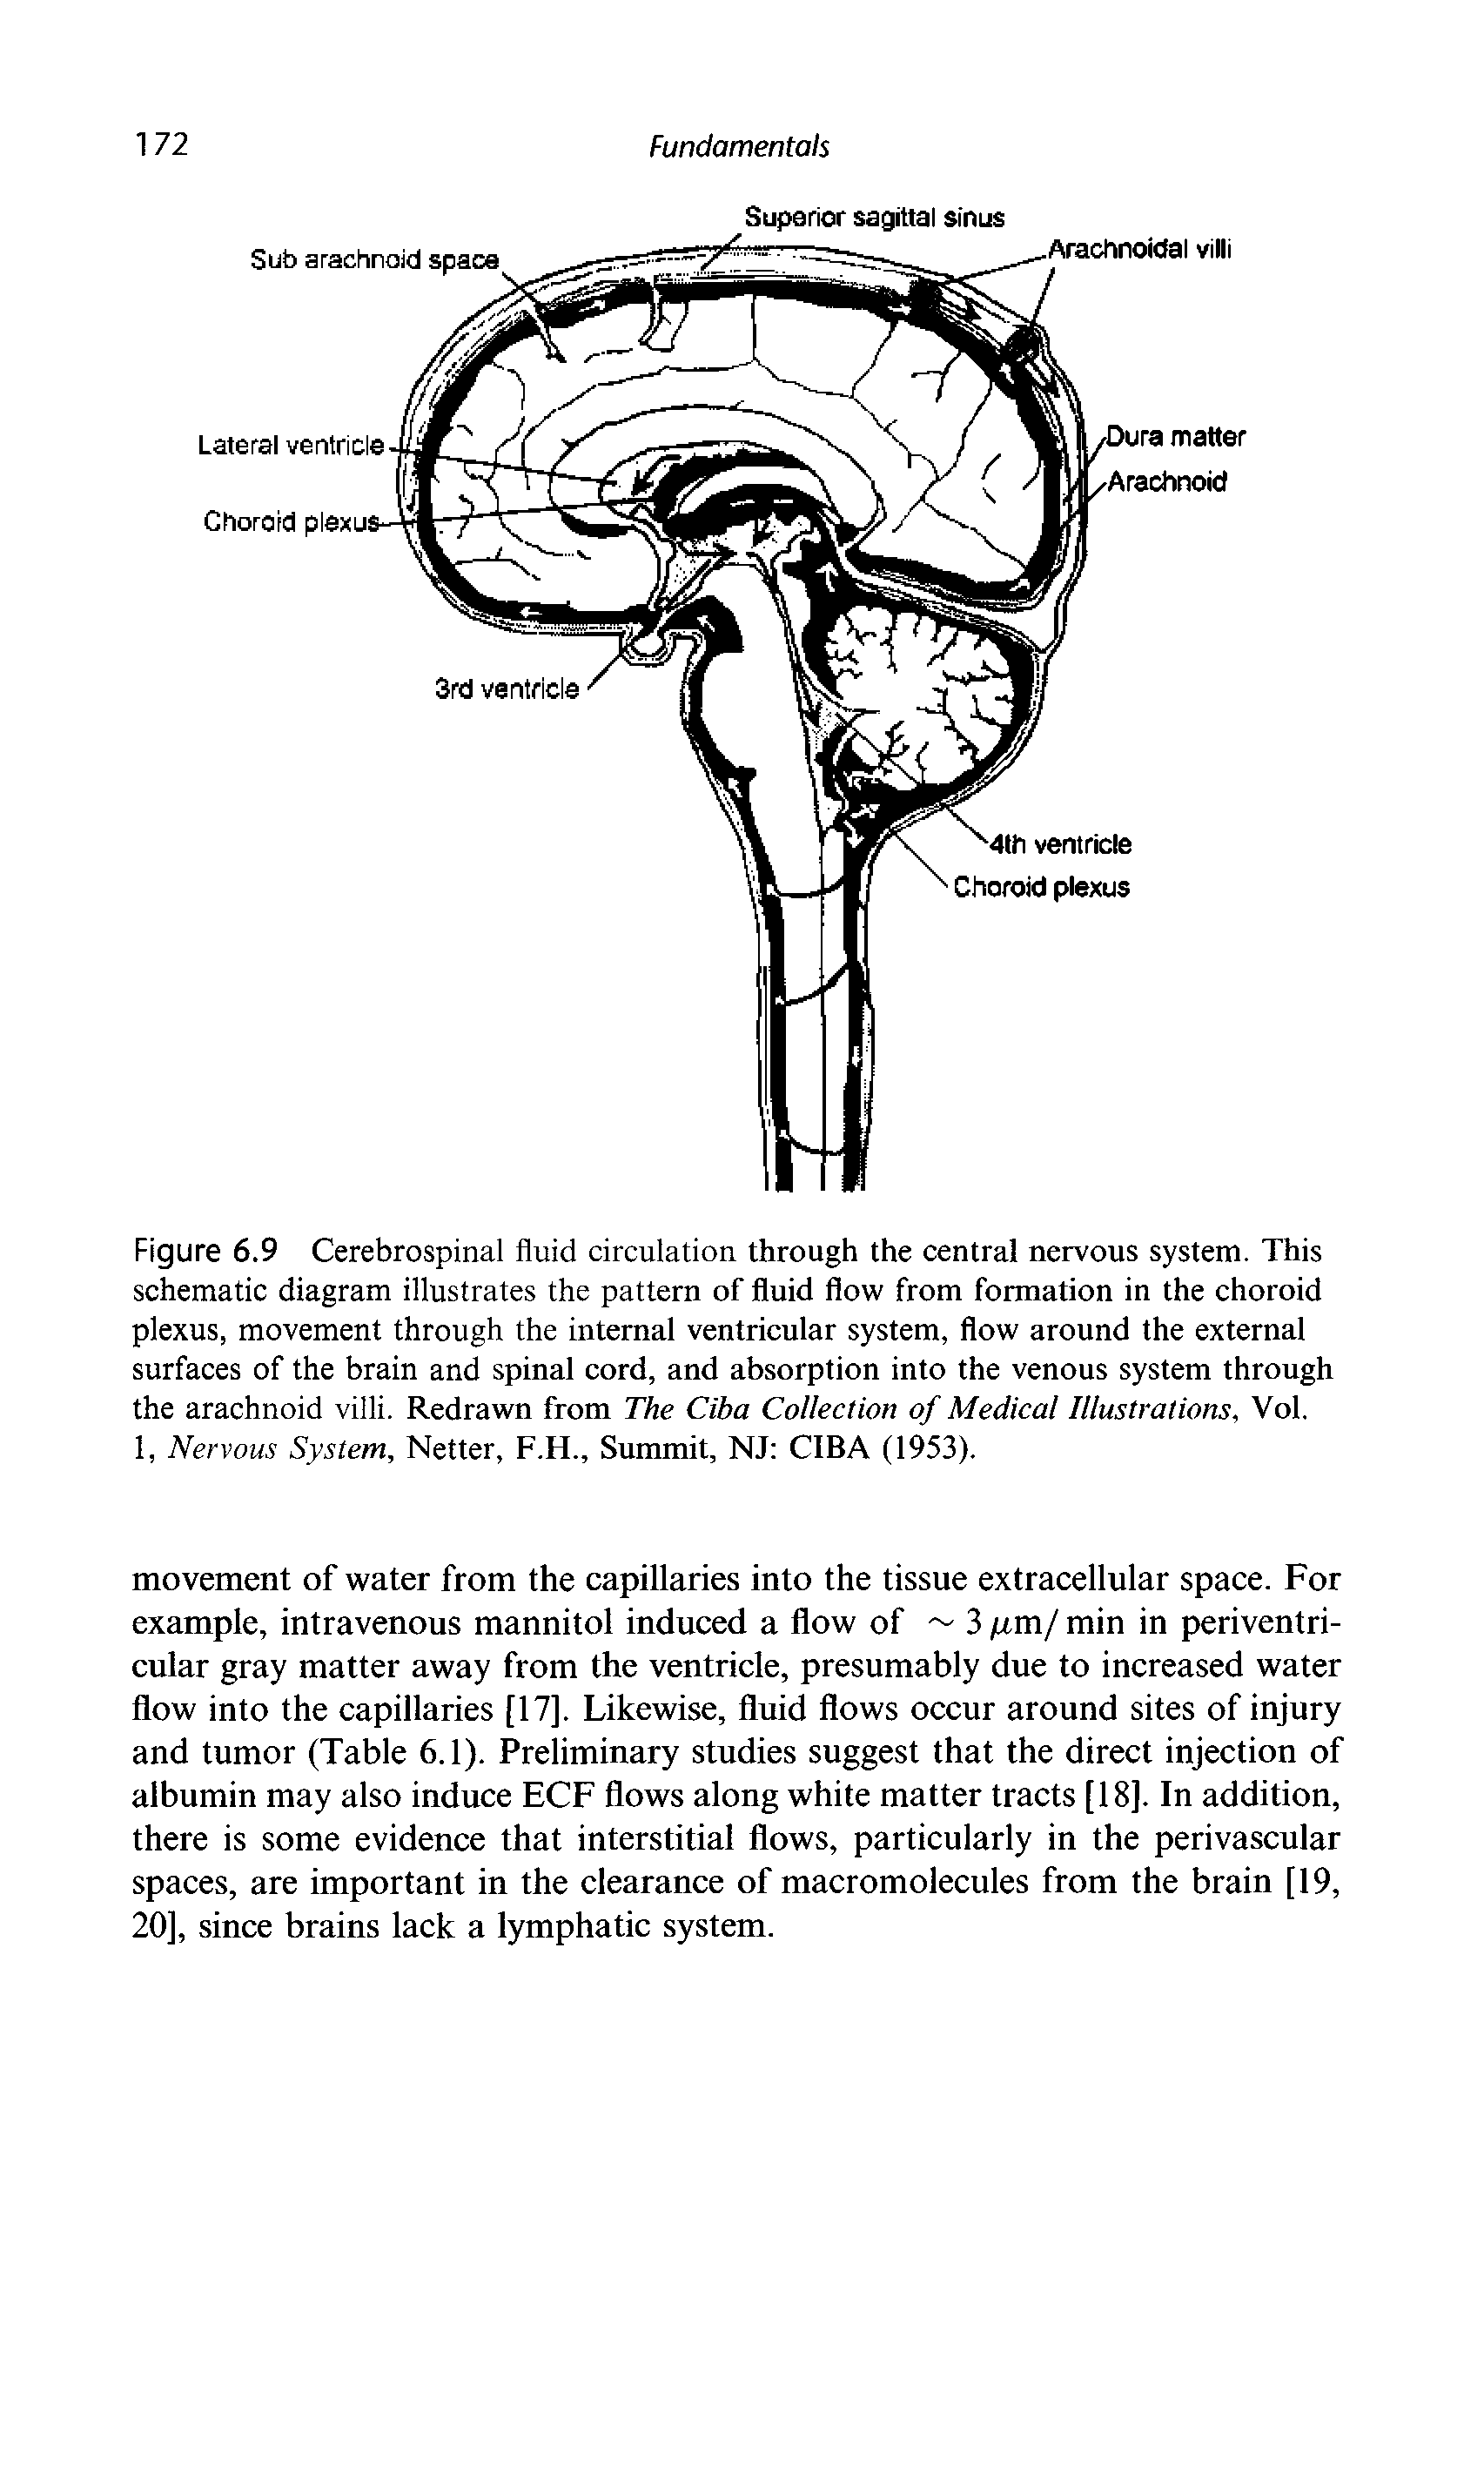 Figure 6.9 Cerebrospinal fluid circulation through the central nervous system. This schematic diagram illustrates the pattern of fluid flow from formation in the choroid plexus, movement through the internal ventricular system, flow around the external surfaces of the brain and spinal cord, and absorption into the venous system through the arachnoid villi. Redrawn from The Ciba Collection of Medical Illustrations, Vol.